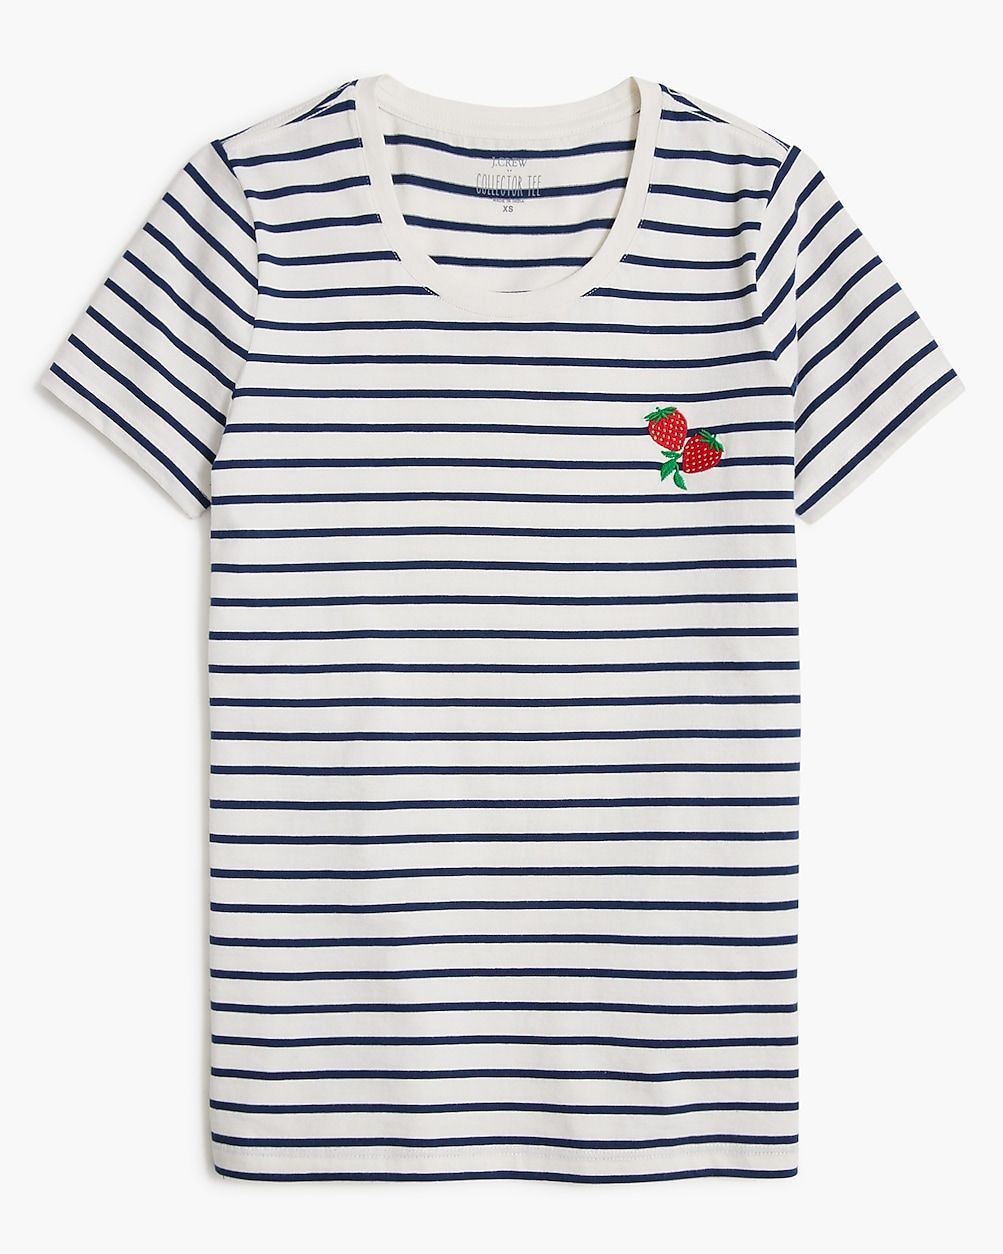 Embroidered strawberry graphic tee | J.Crew Factory